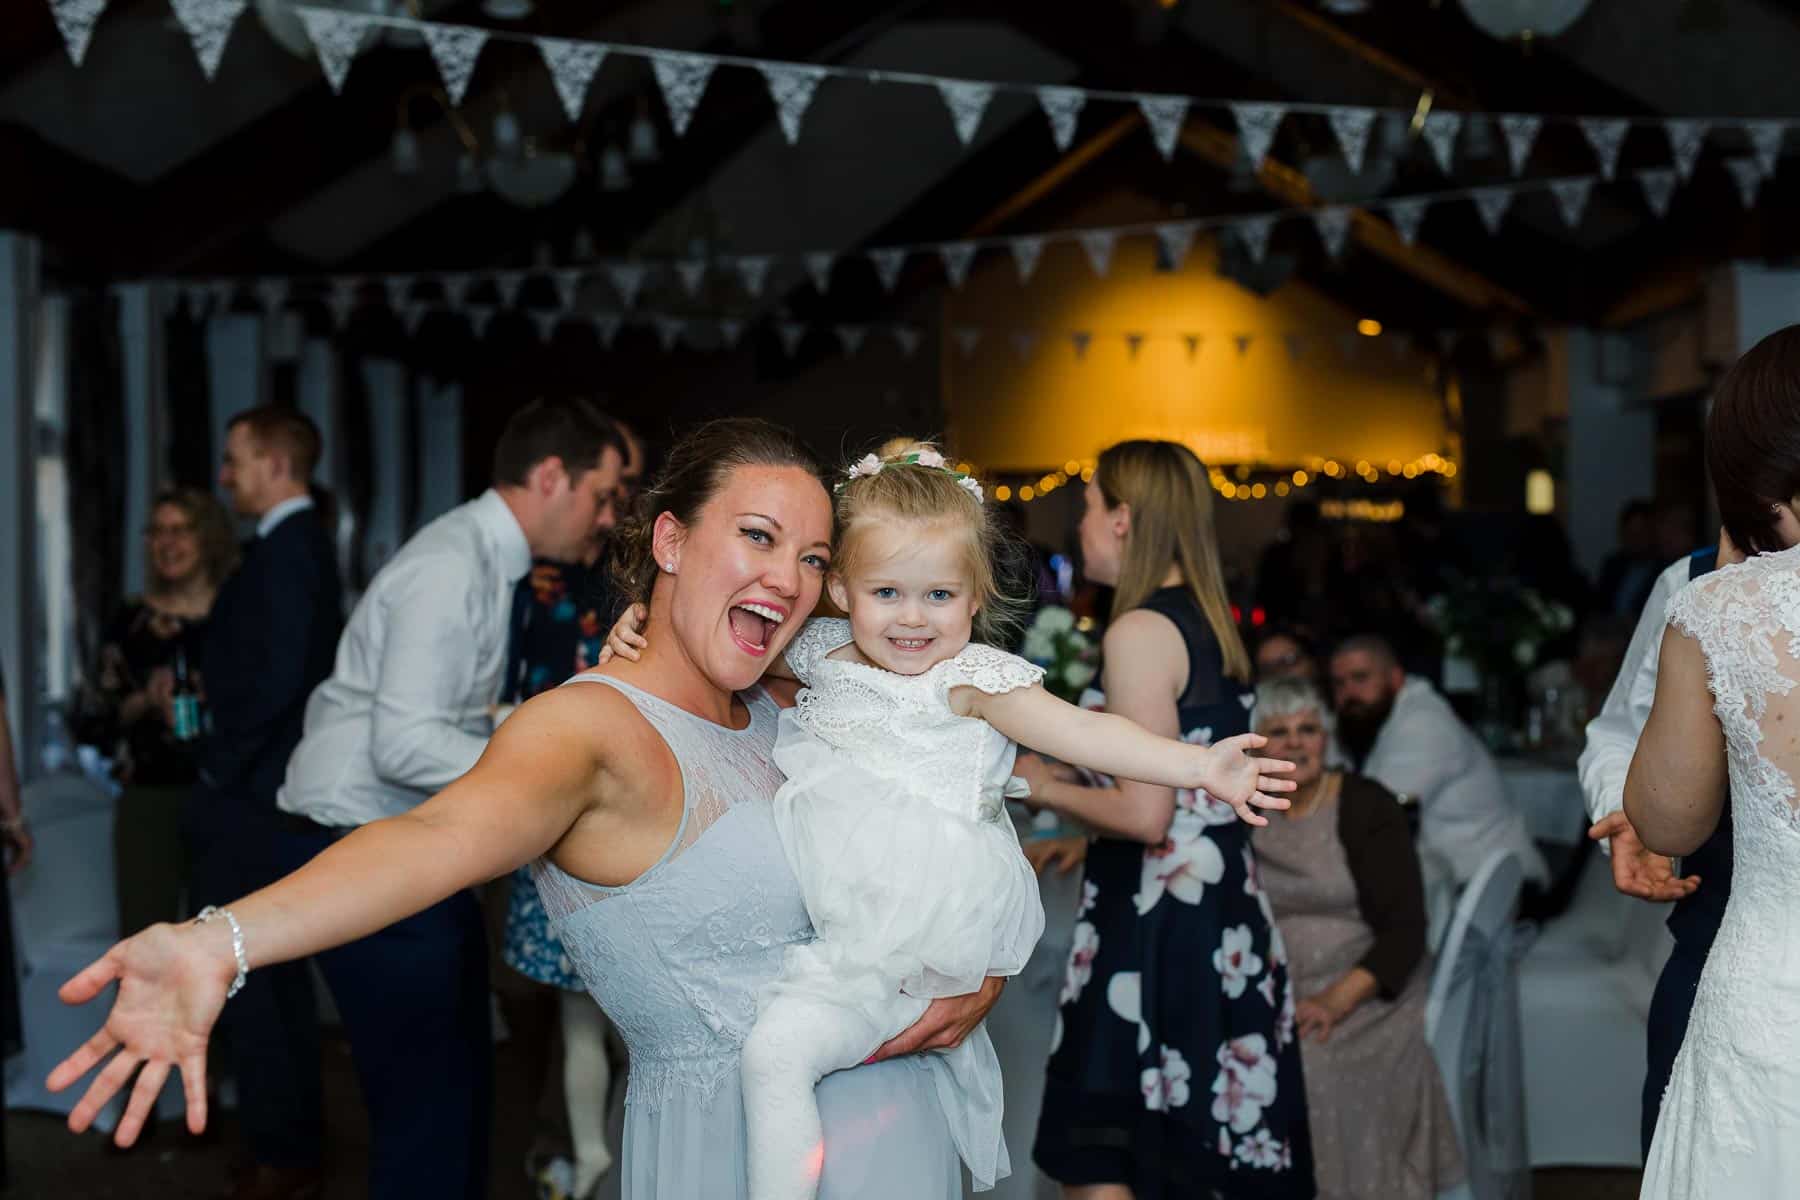 Bridesmaid dancing with flower girl on the dance floor